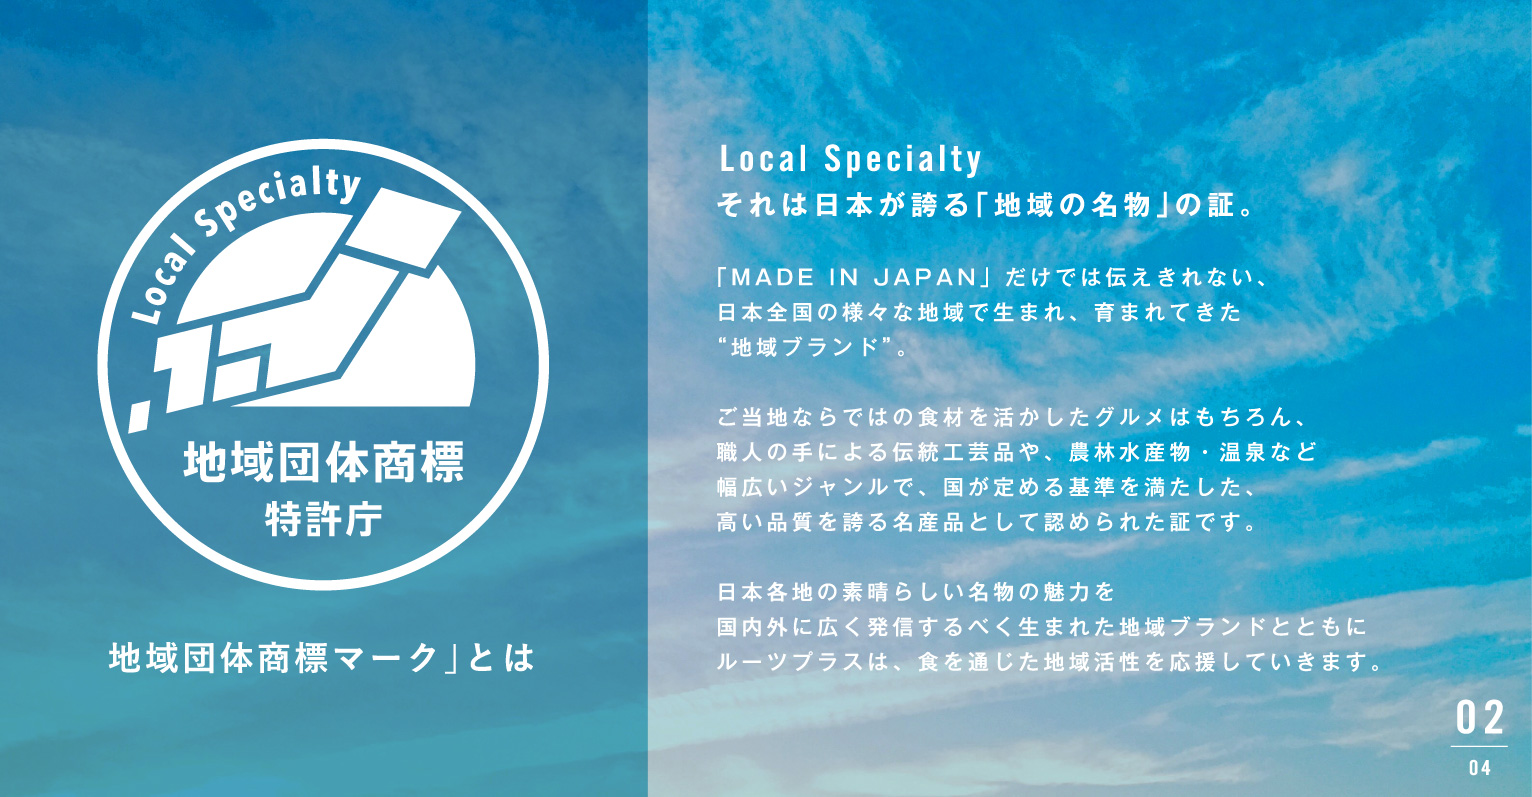 Local Specialty 日本が誇る、九州の名産品が集結。